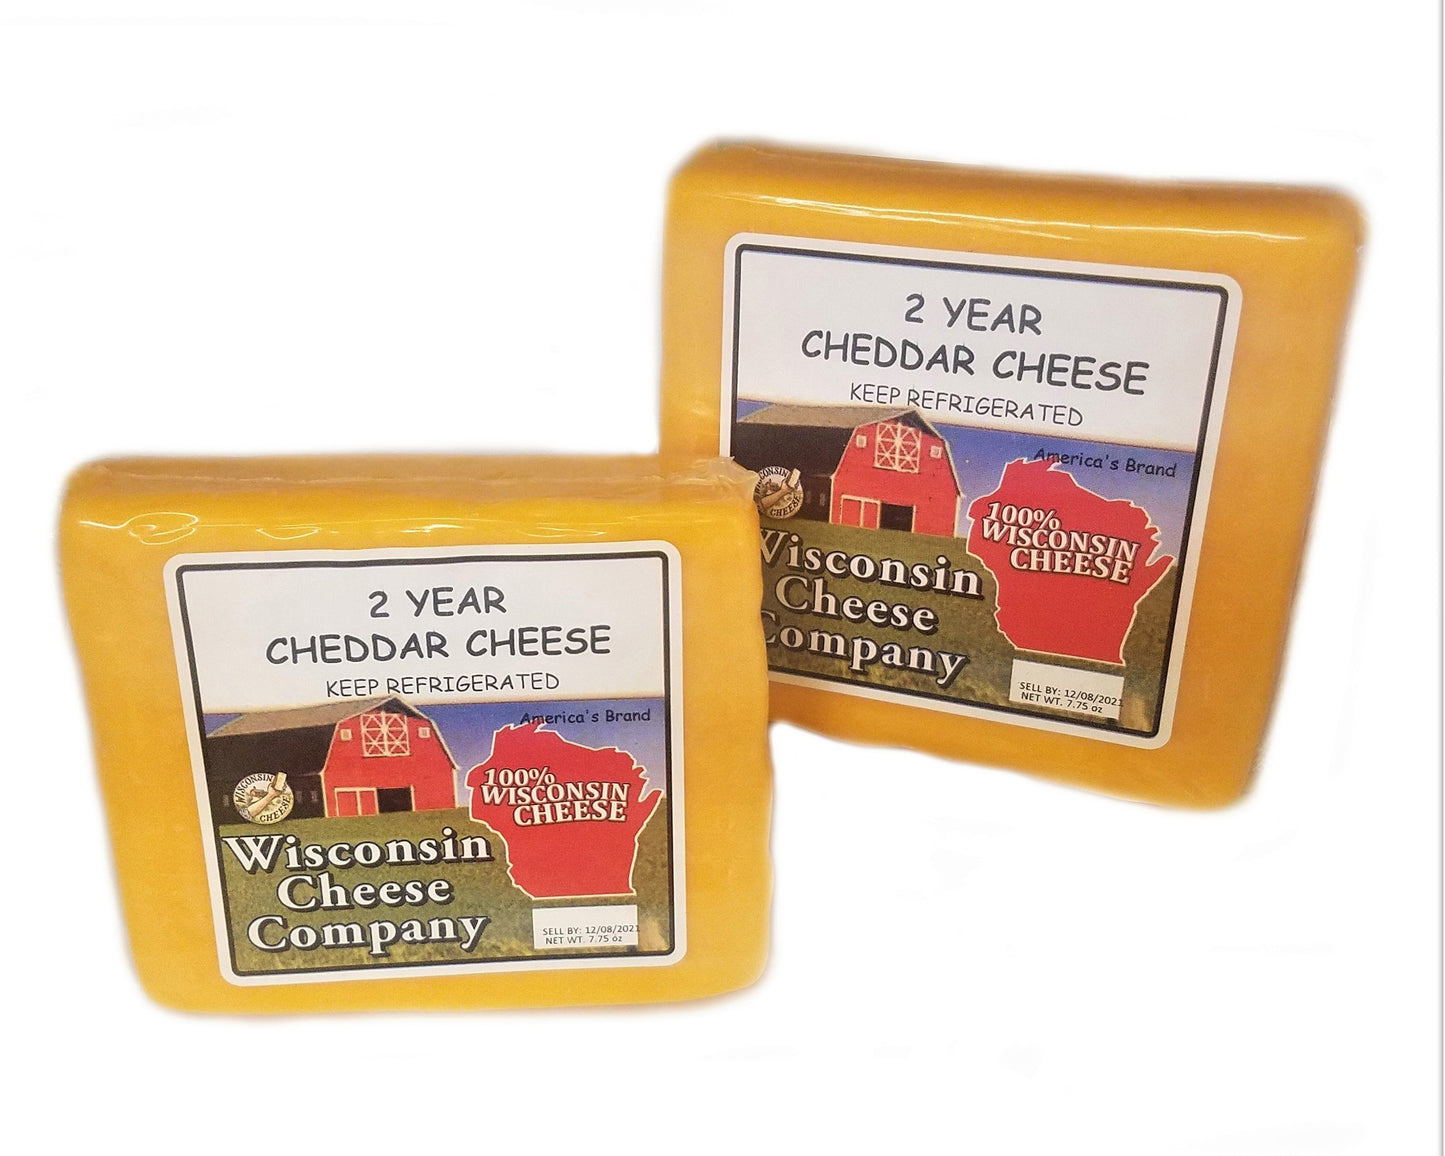 Two blocks of 2 Year Cheddar Cheese